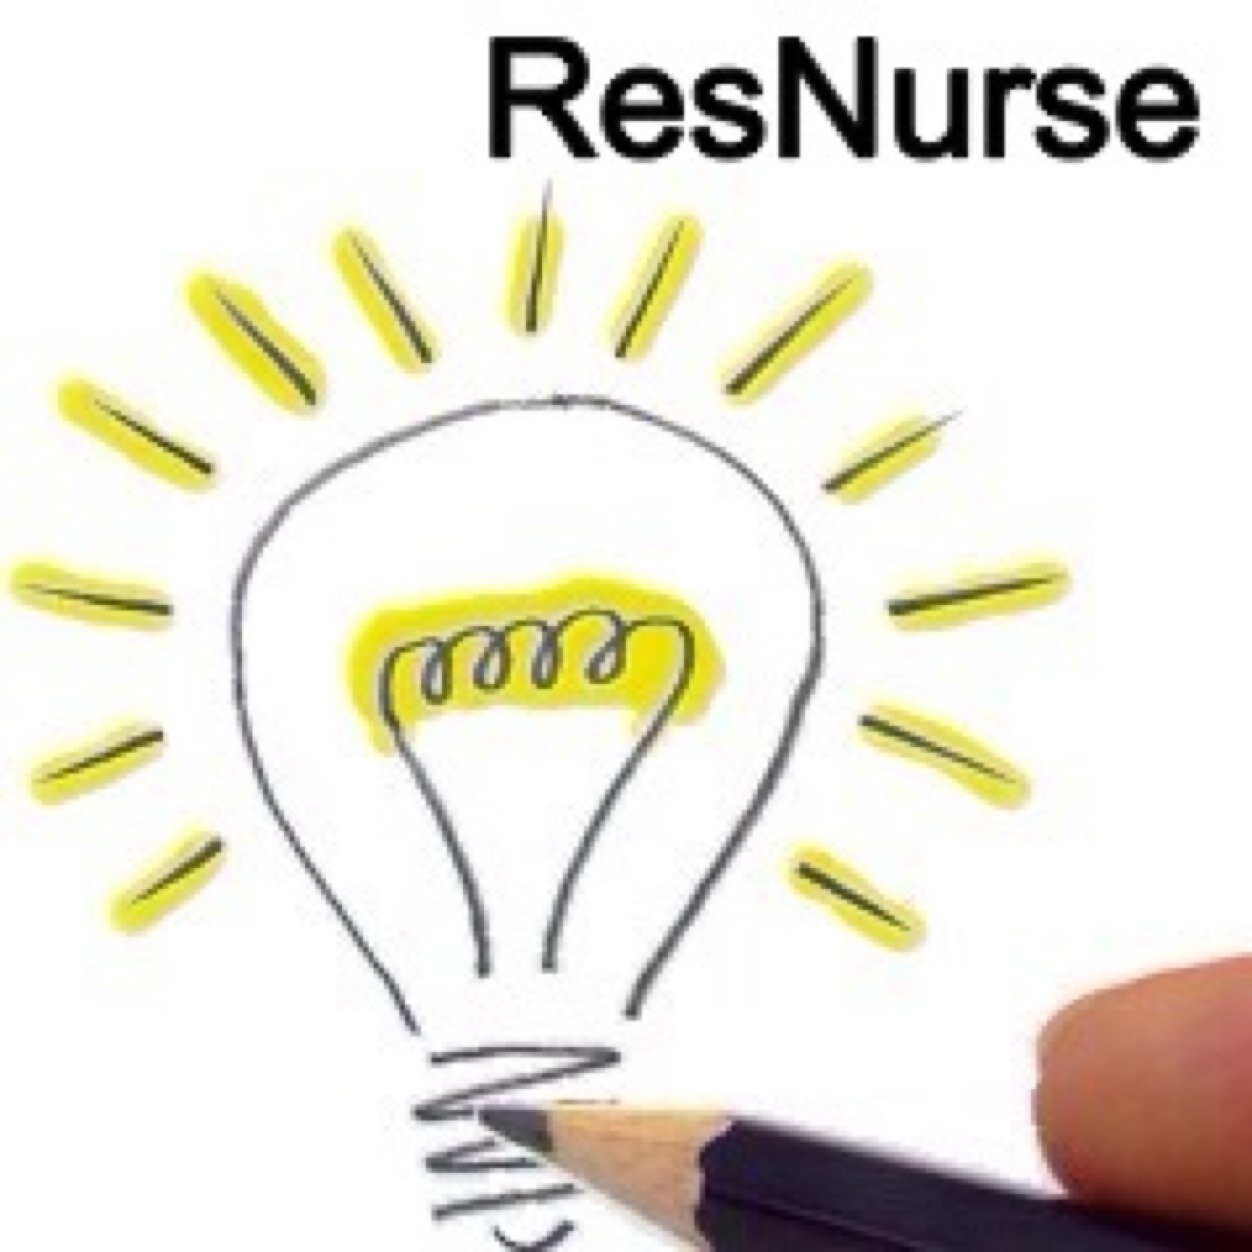 Connecting Clinical & Academic Research Nurses & Allied Health Professionals. Follow us to access a large research community. #crnurse #whywedoresearch #oktoask